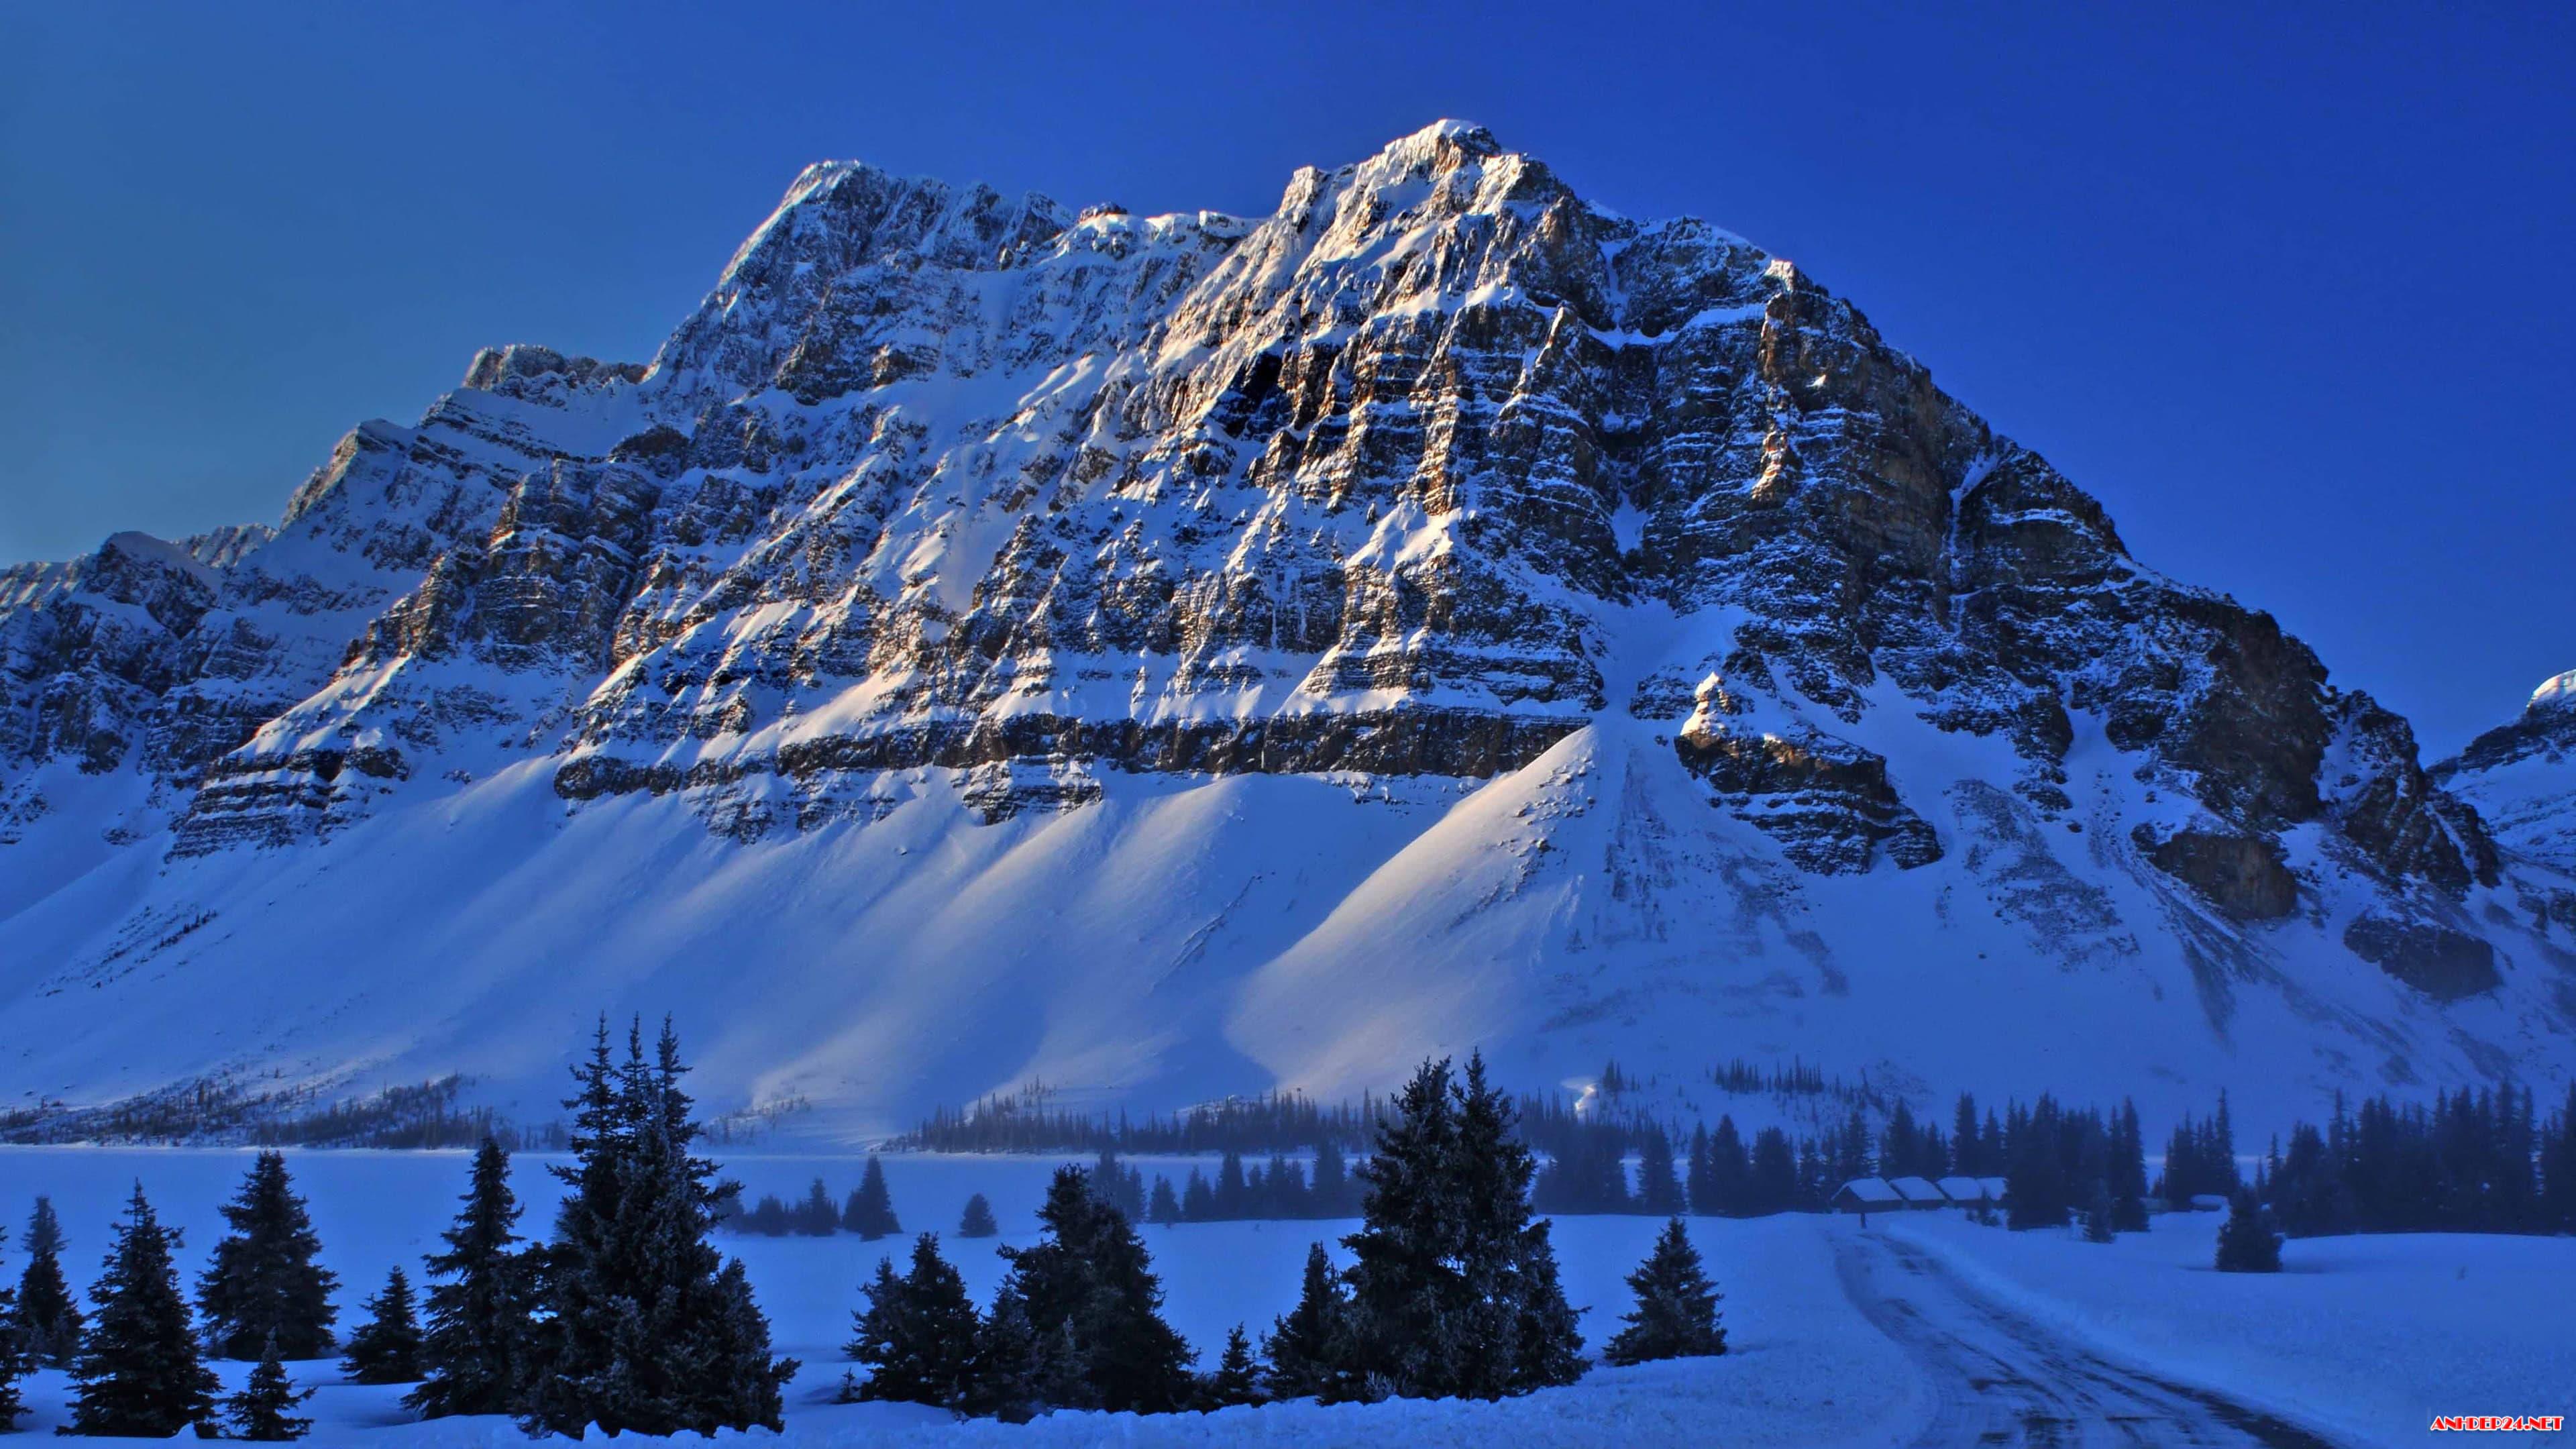 Snowy Mountains In Bow Lake Banff National Park UHD 4K Wallpaper